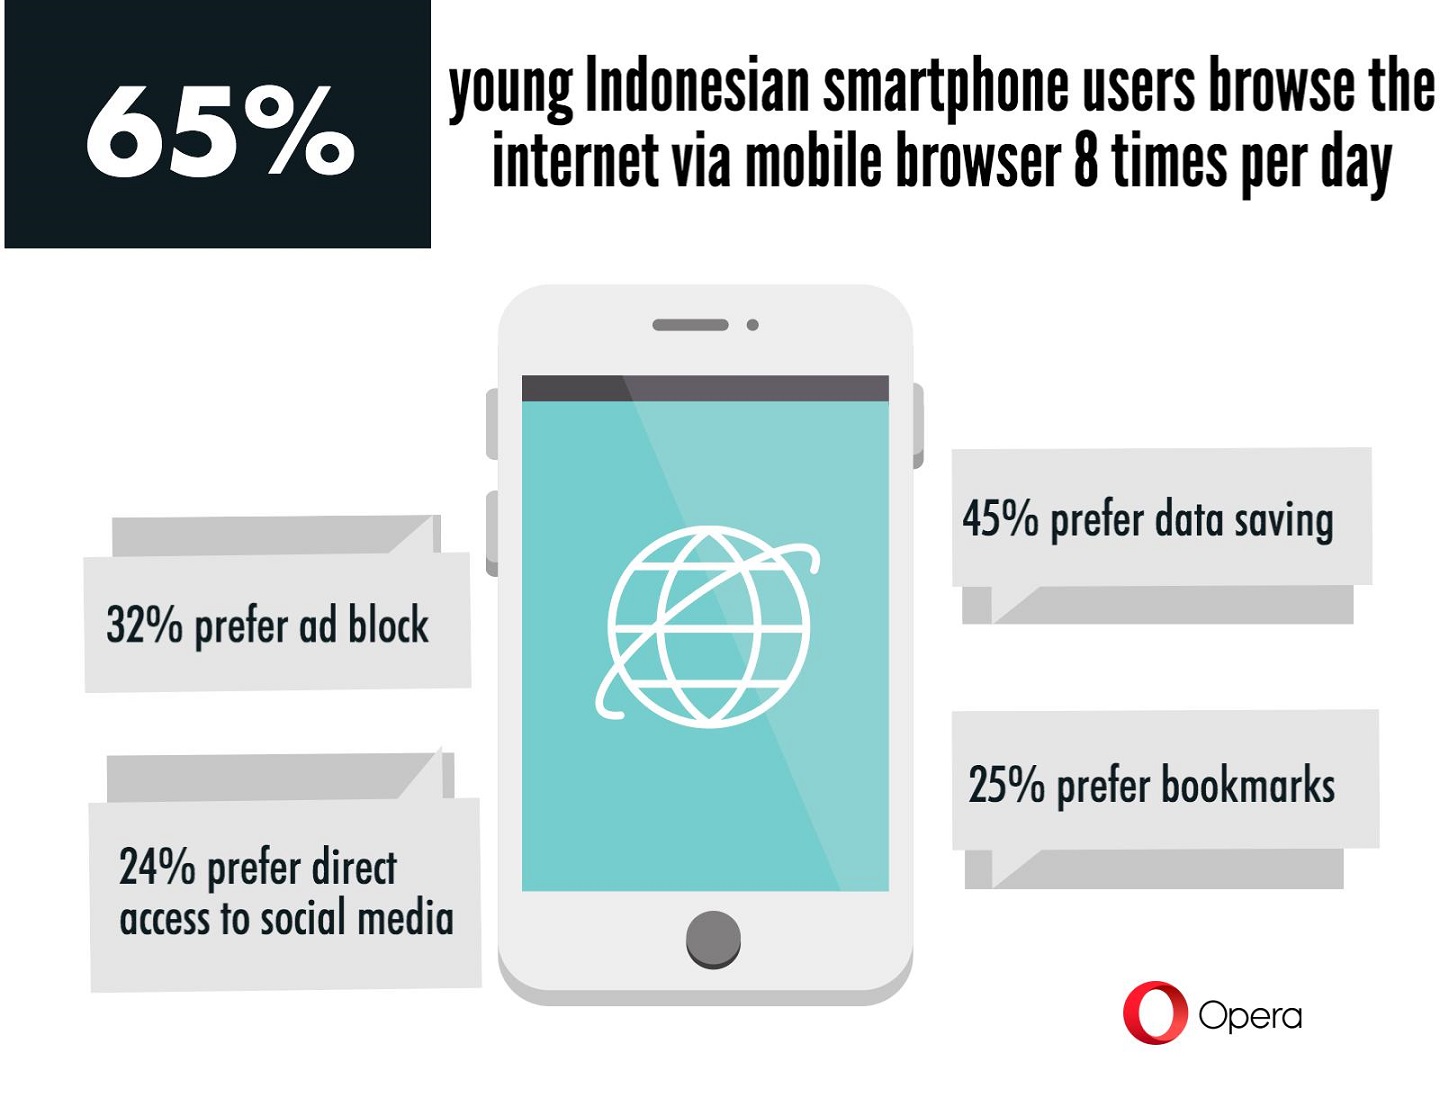 Most Indonesian smartphone users dissatisfied with default browsers